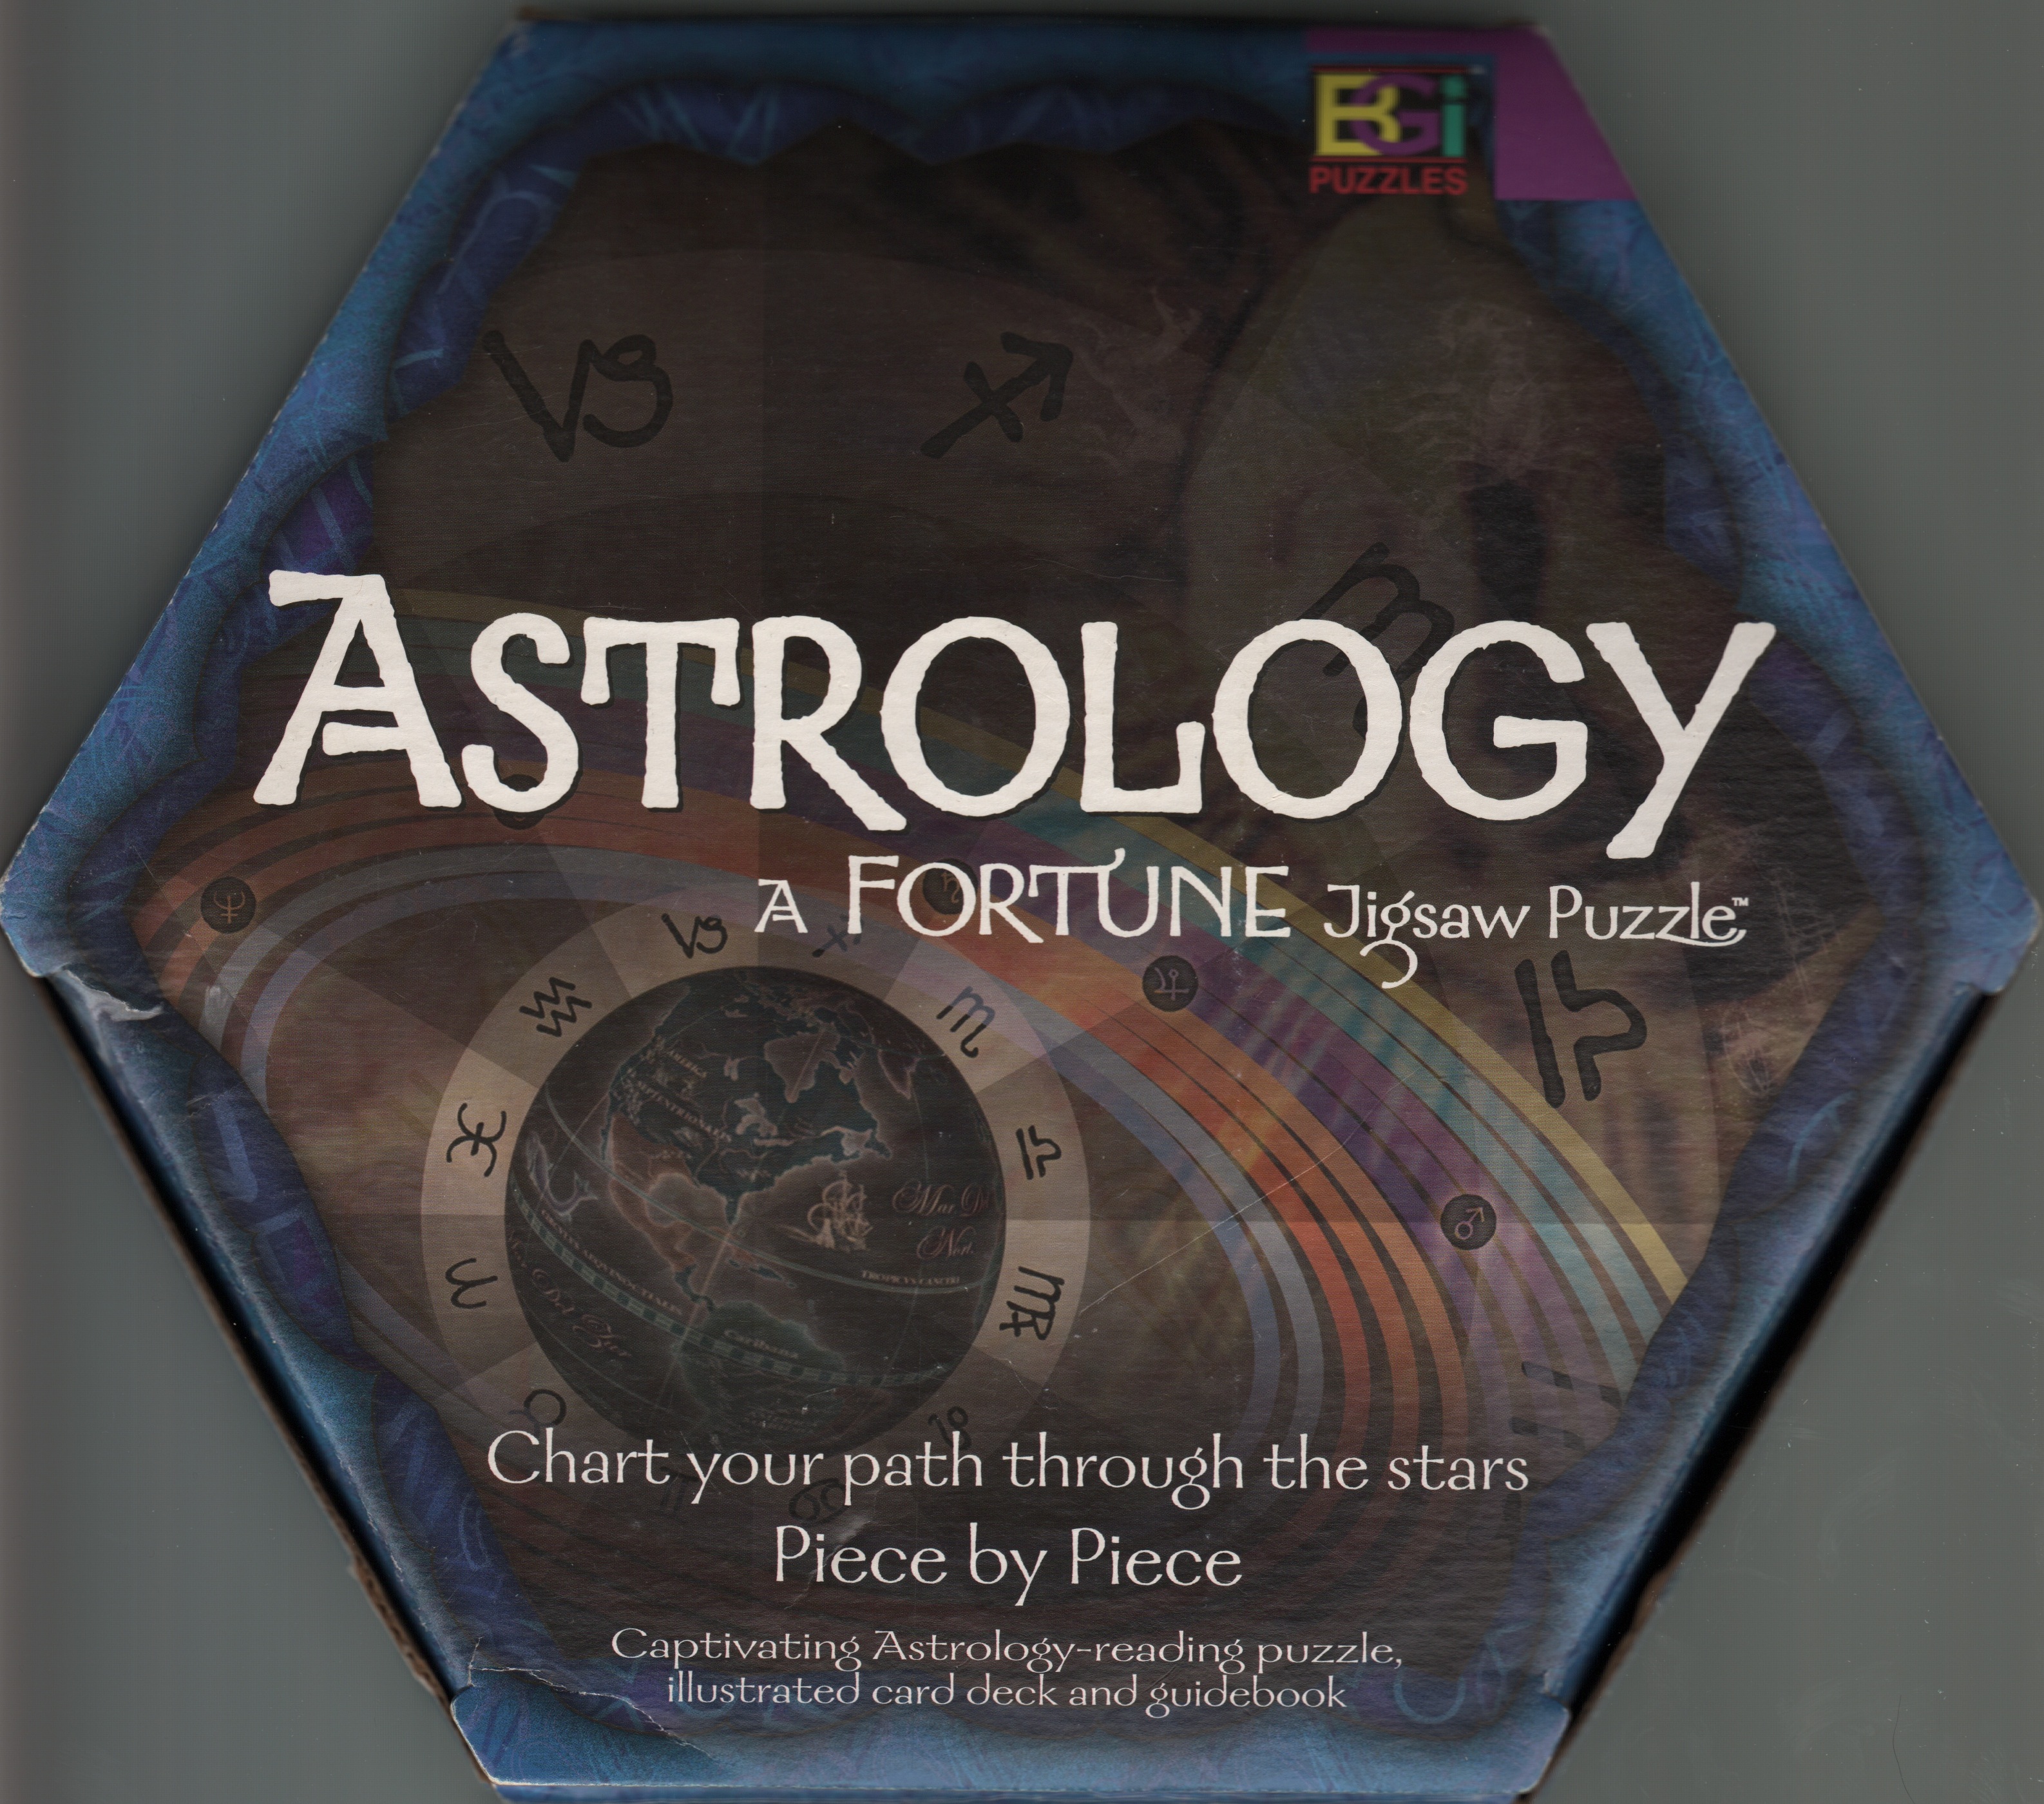 Astrology- a Fortune Jigsaw Puzzle